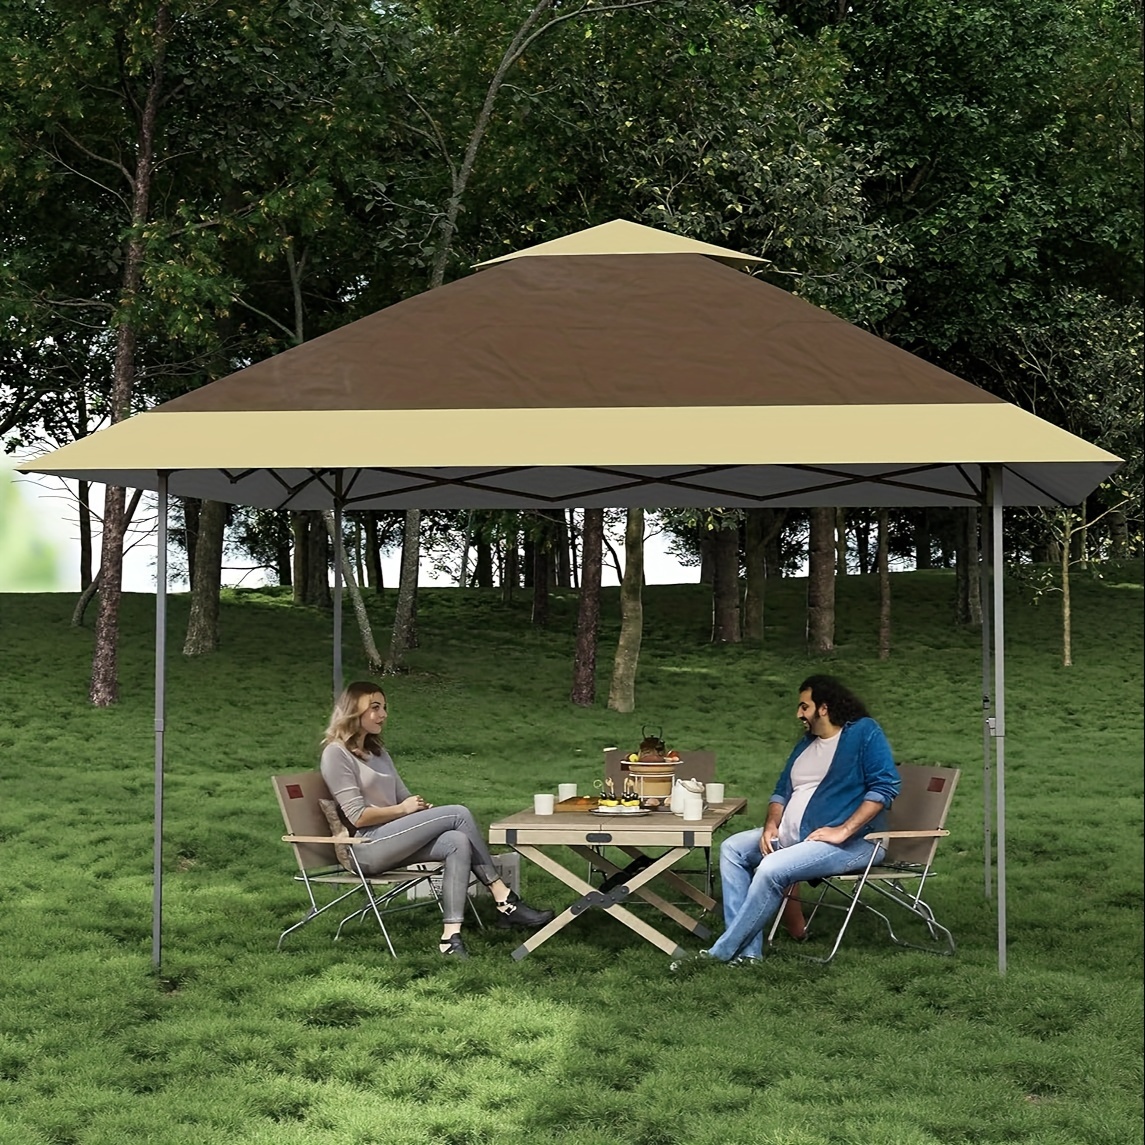 

Pop Up Gazebo Outdoor Canopy Shelter With 4 Stanbags, 8 Stakes Instant For Lawn, Garden, Backyard Deck